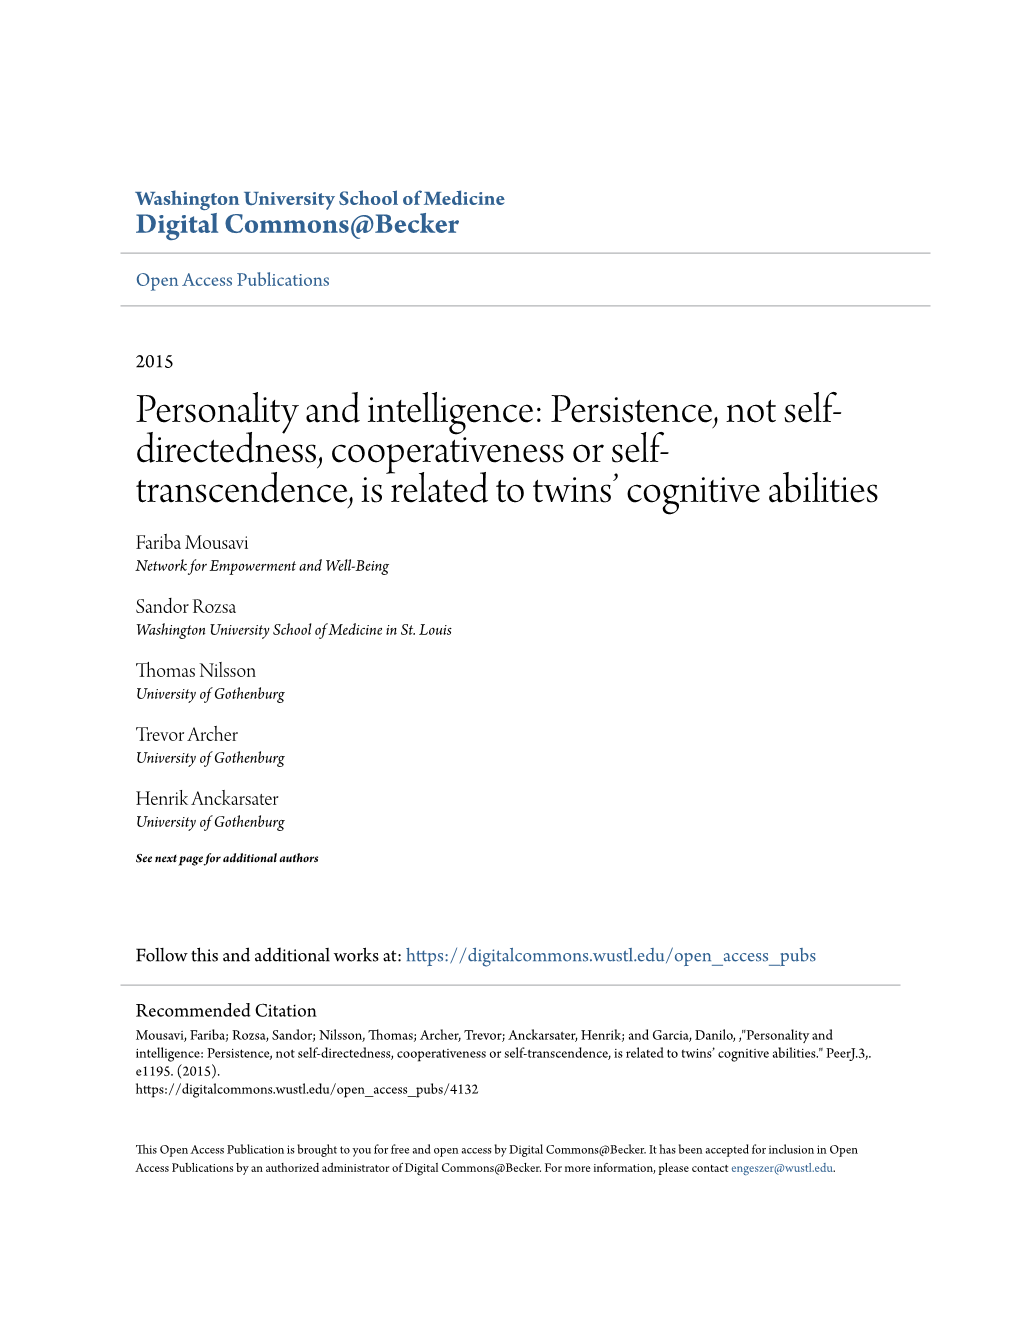 Personality and Intelligence: Persistence, Not Self-Directedness, Cooperativeness Or Self-Transcendence, Is Related to Twins’ Cognitive Abilities." Peerj.3